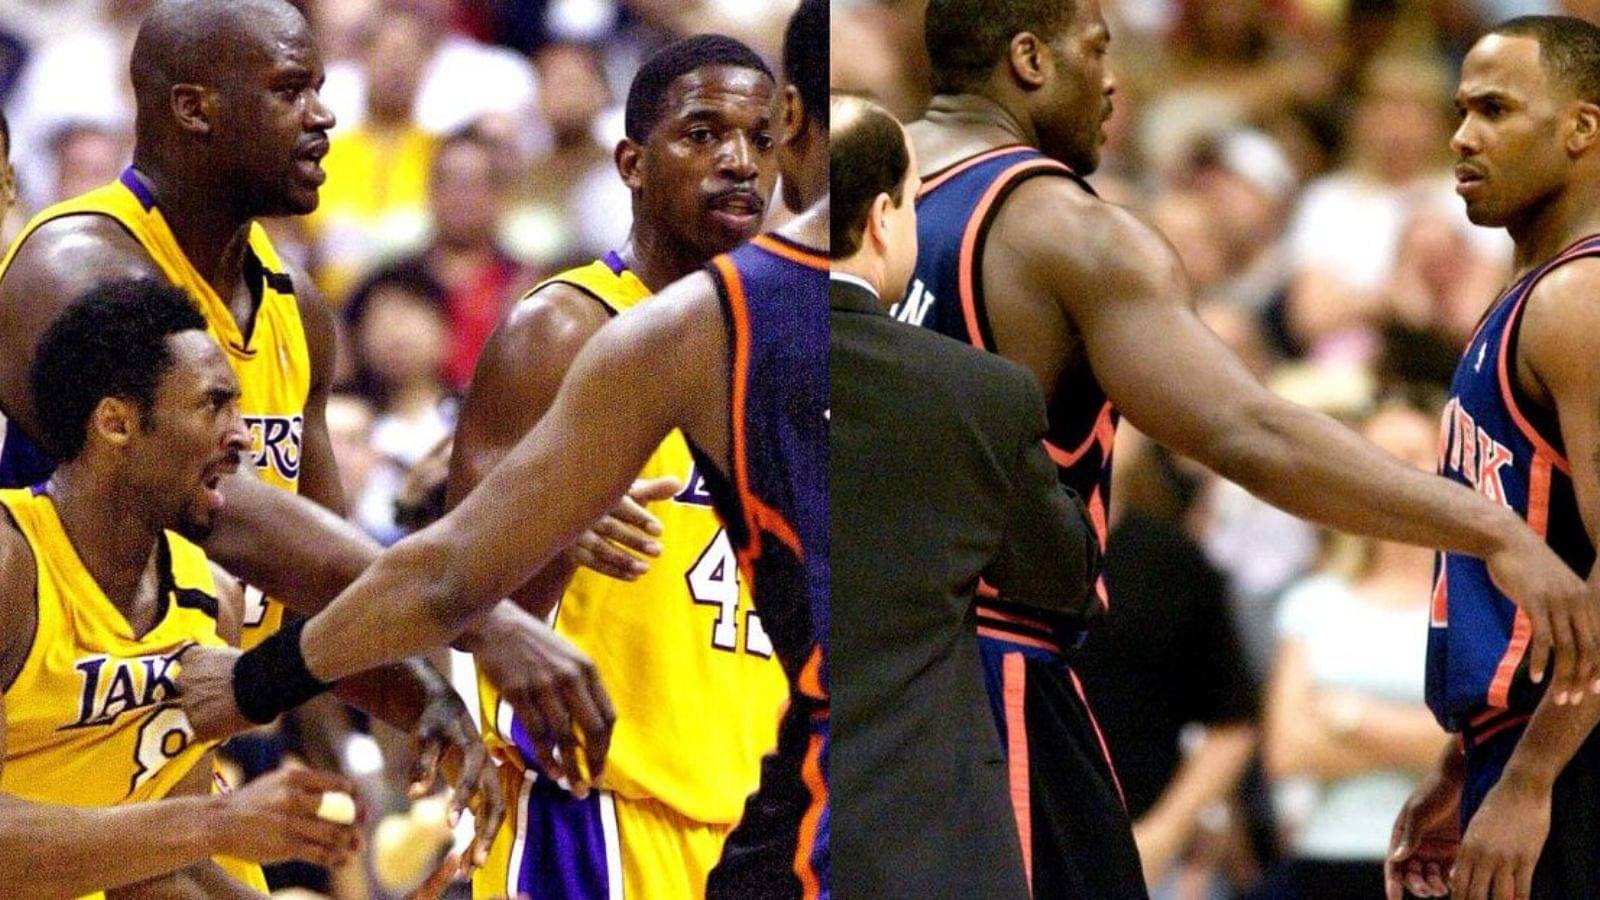 “What Are You Gonna Do About it, B*tc*?”: Kobe Bryant Once Berated Chris Childs After Throwing Elbows at Him and Got Punched in the Neck